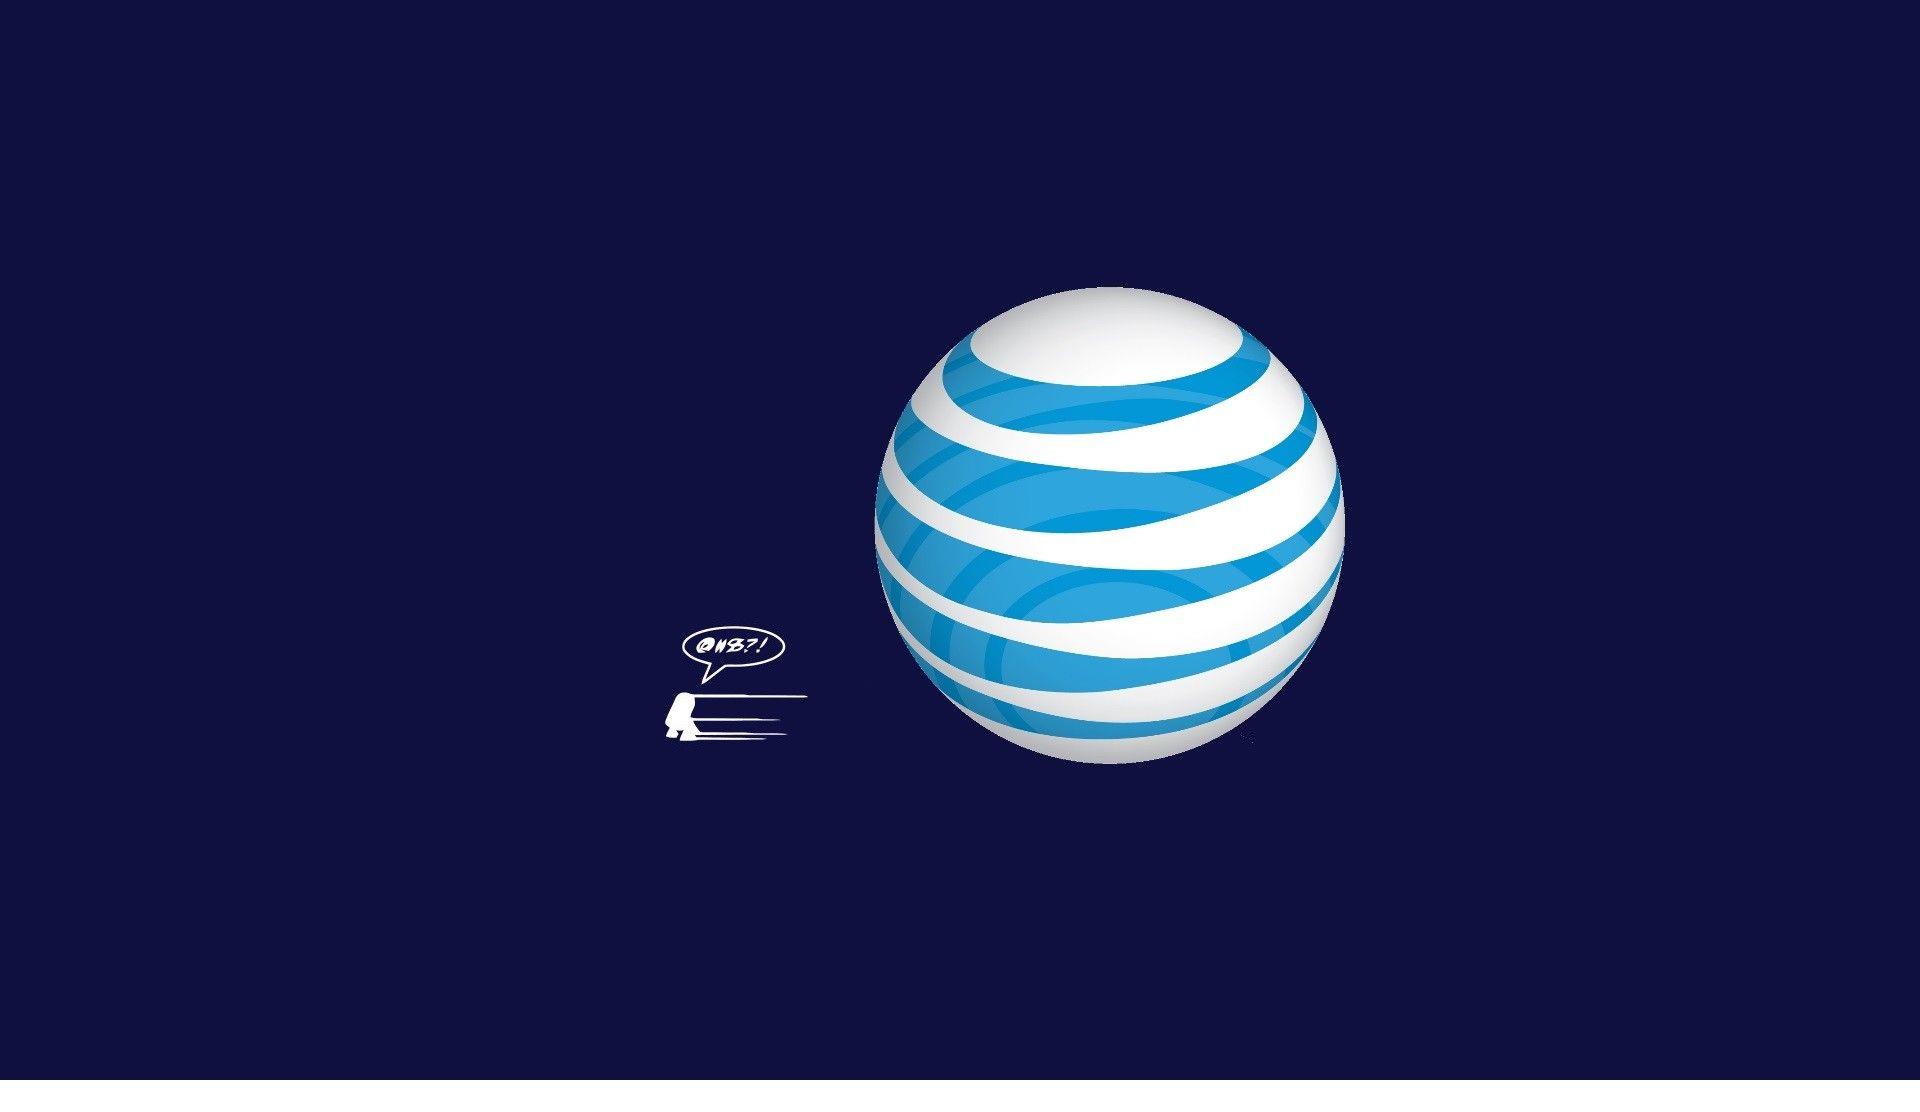 AT&T Wallpaper Free AT&T Background